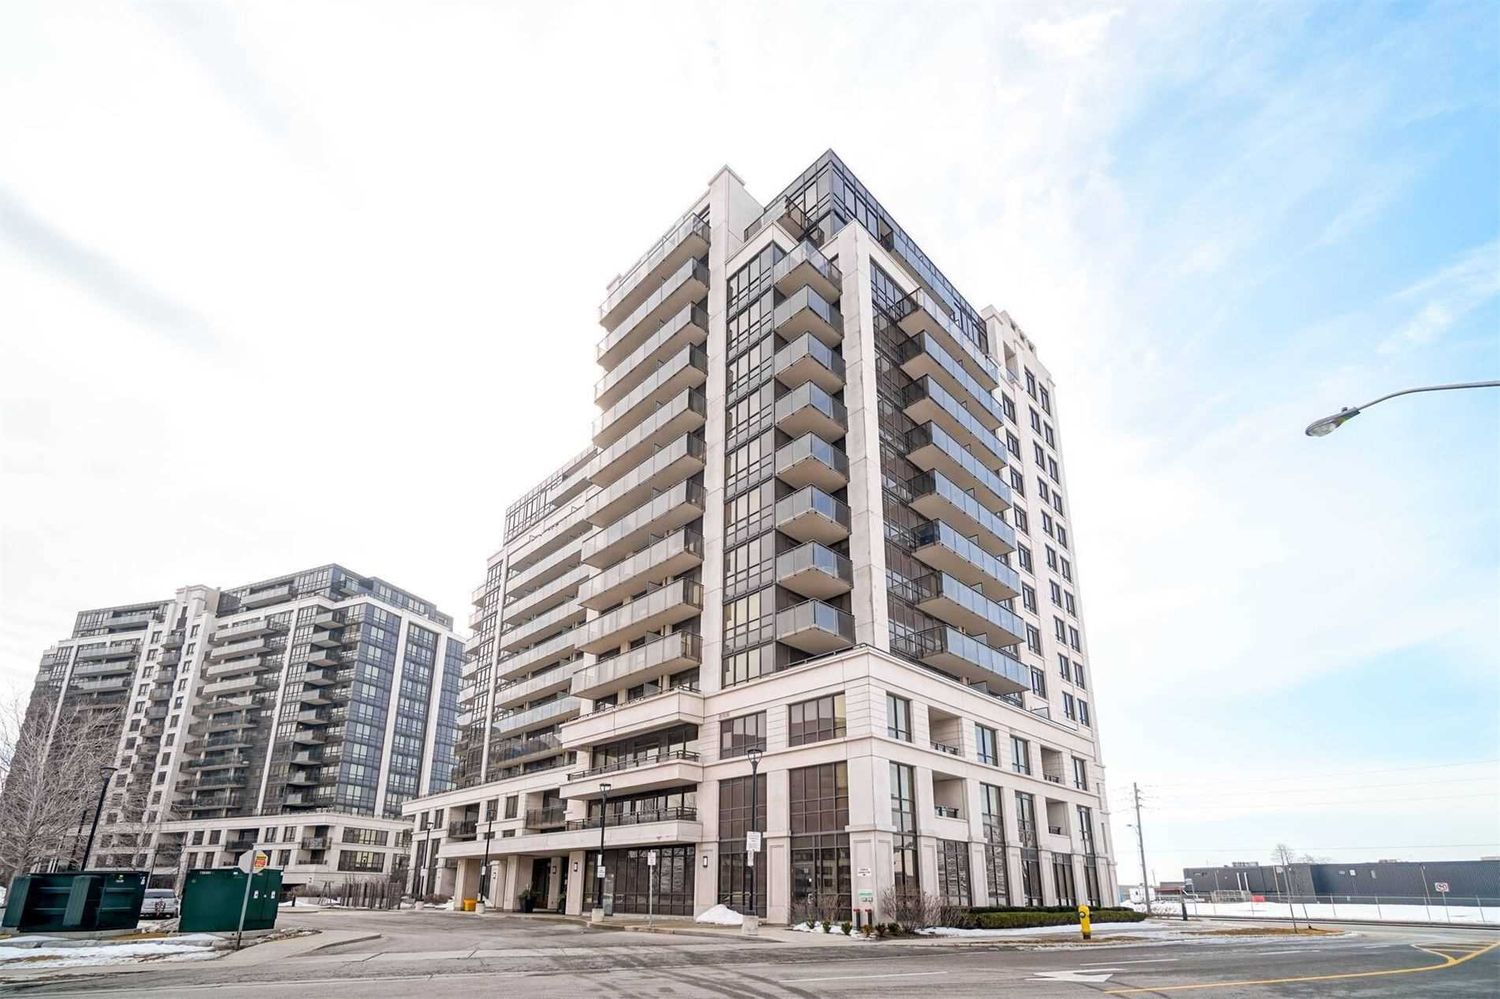 1070 Sheppard Avenue W. M1 | M2 Condos is located in  North York, Toronto - image #3 of 3